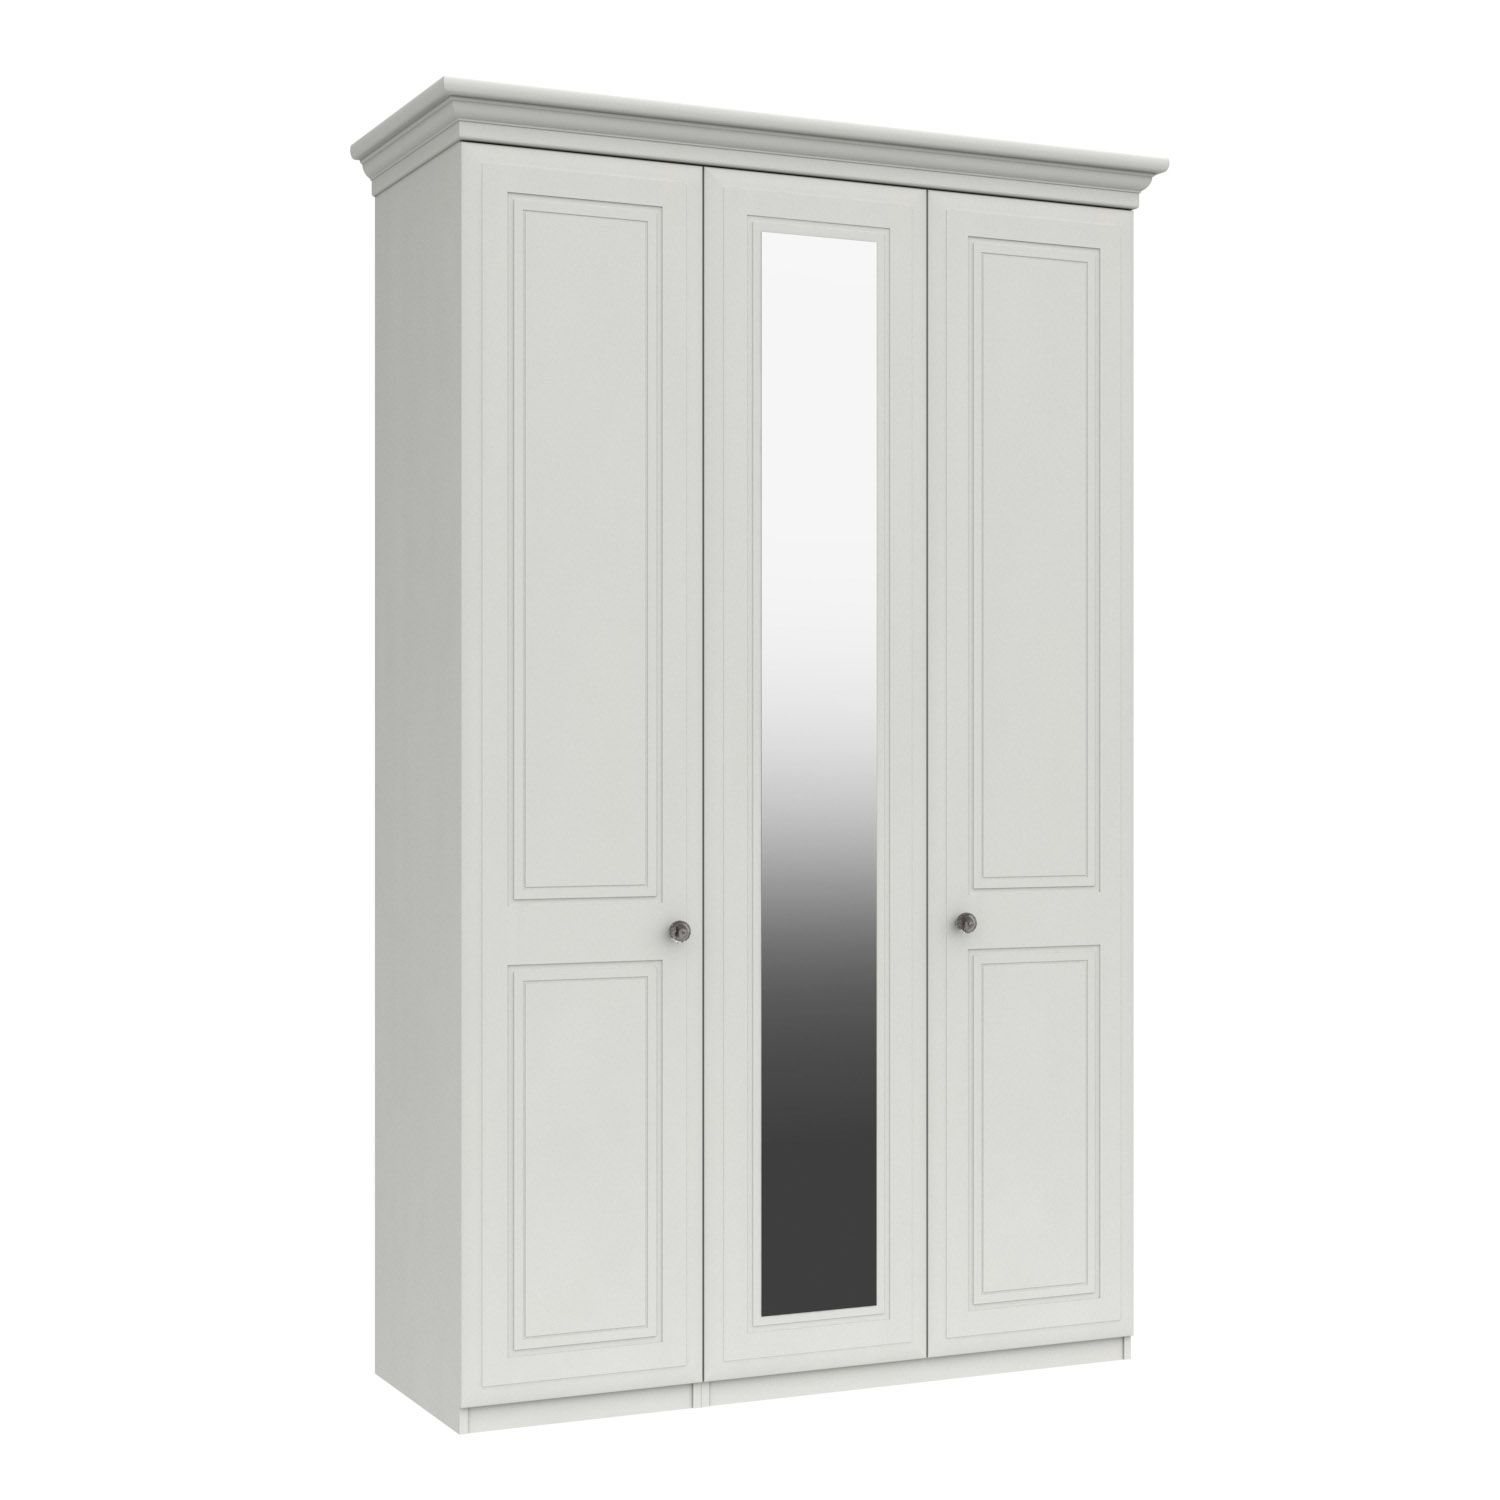 Tall 3 Door Wardrobe With Mirror – Tr Hayes Furniture Bath With Regard To White 3 Door Mirrored Wardrobes (View 11 of 15)